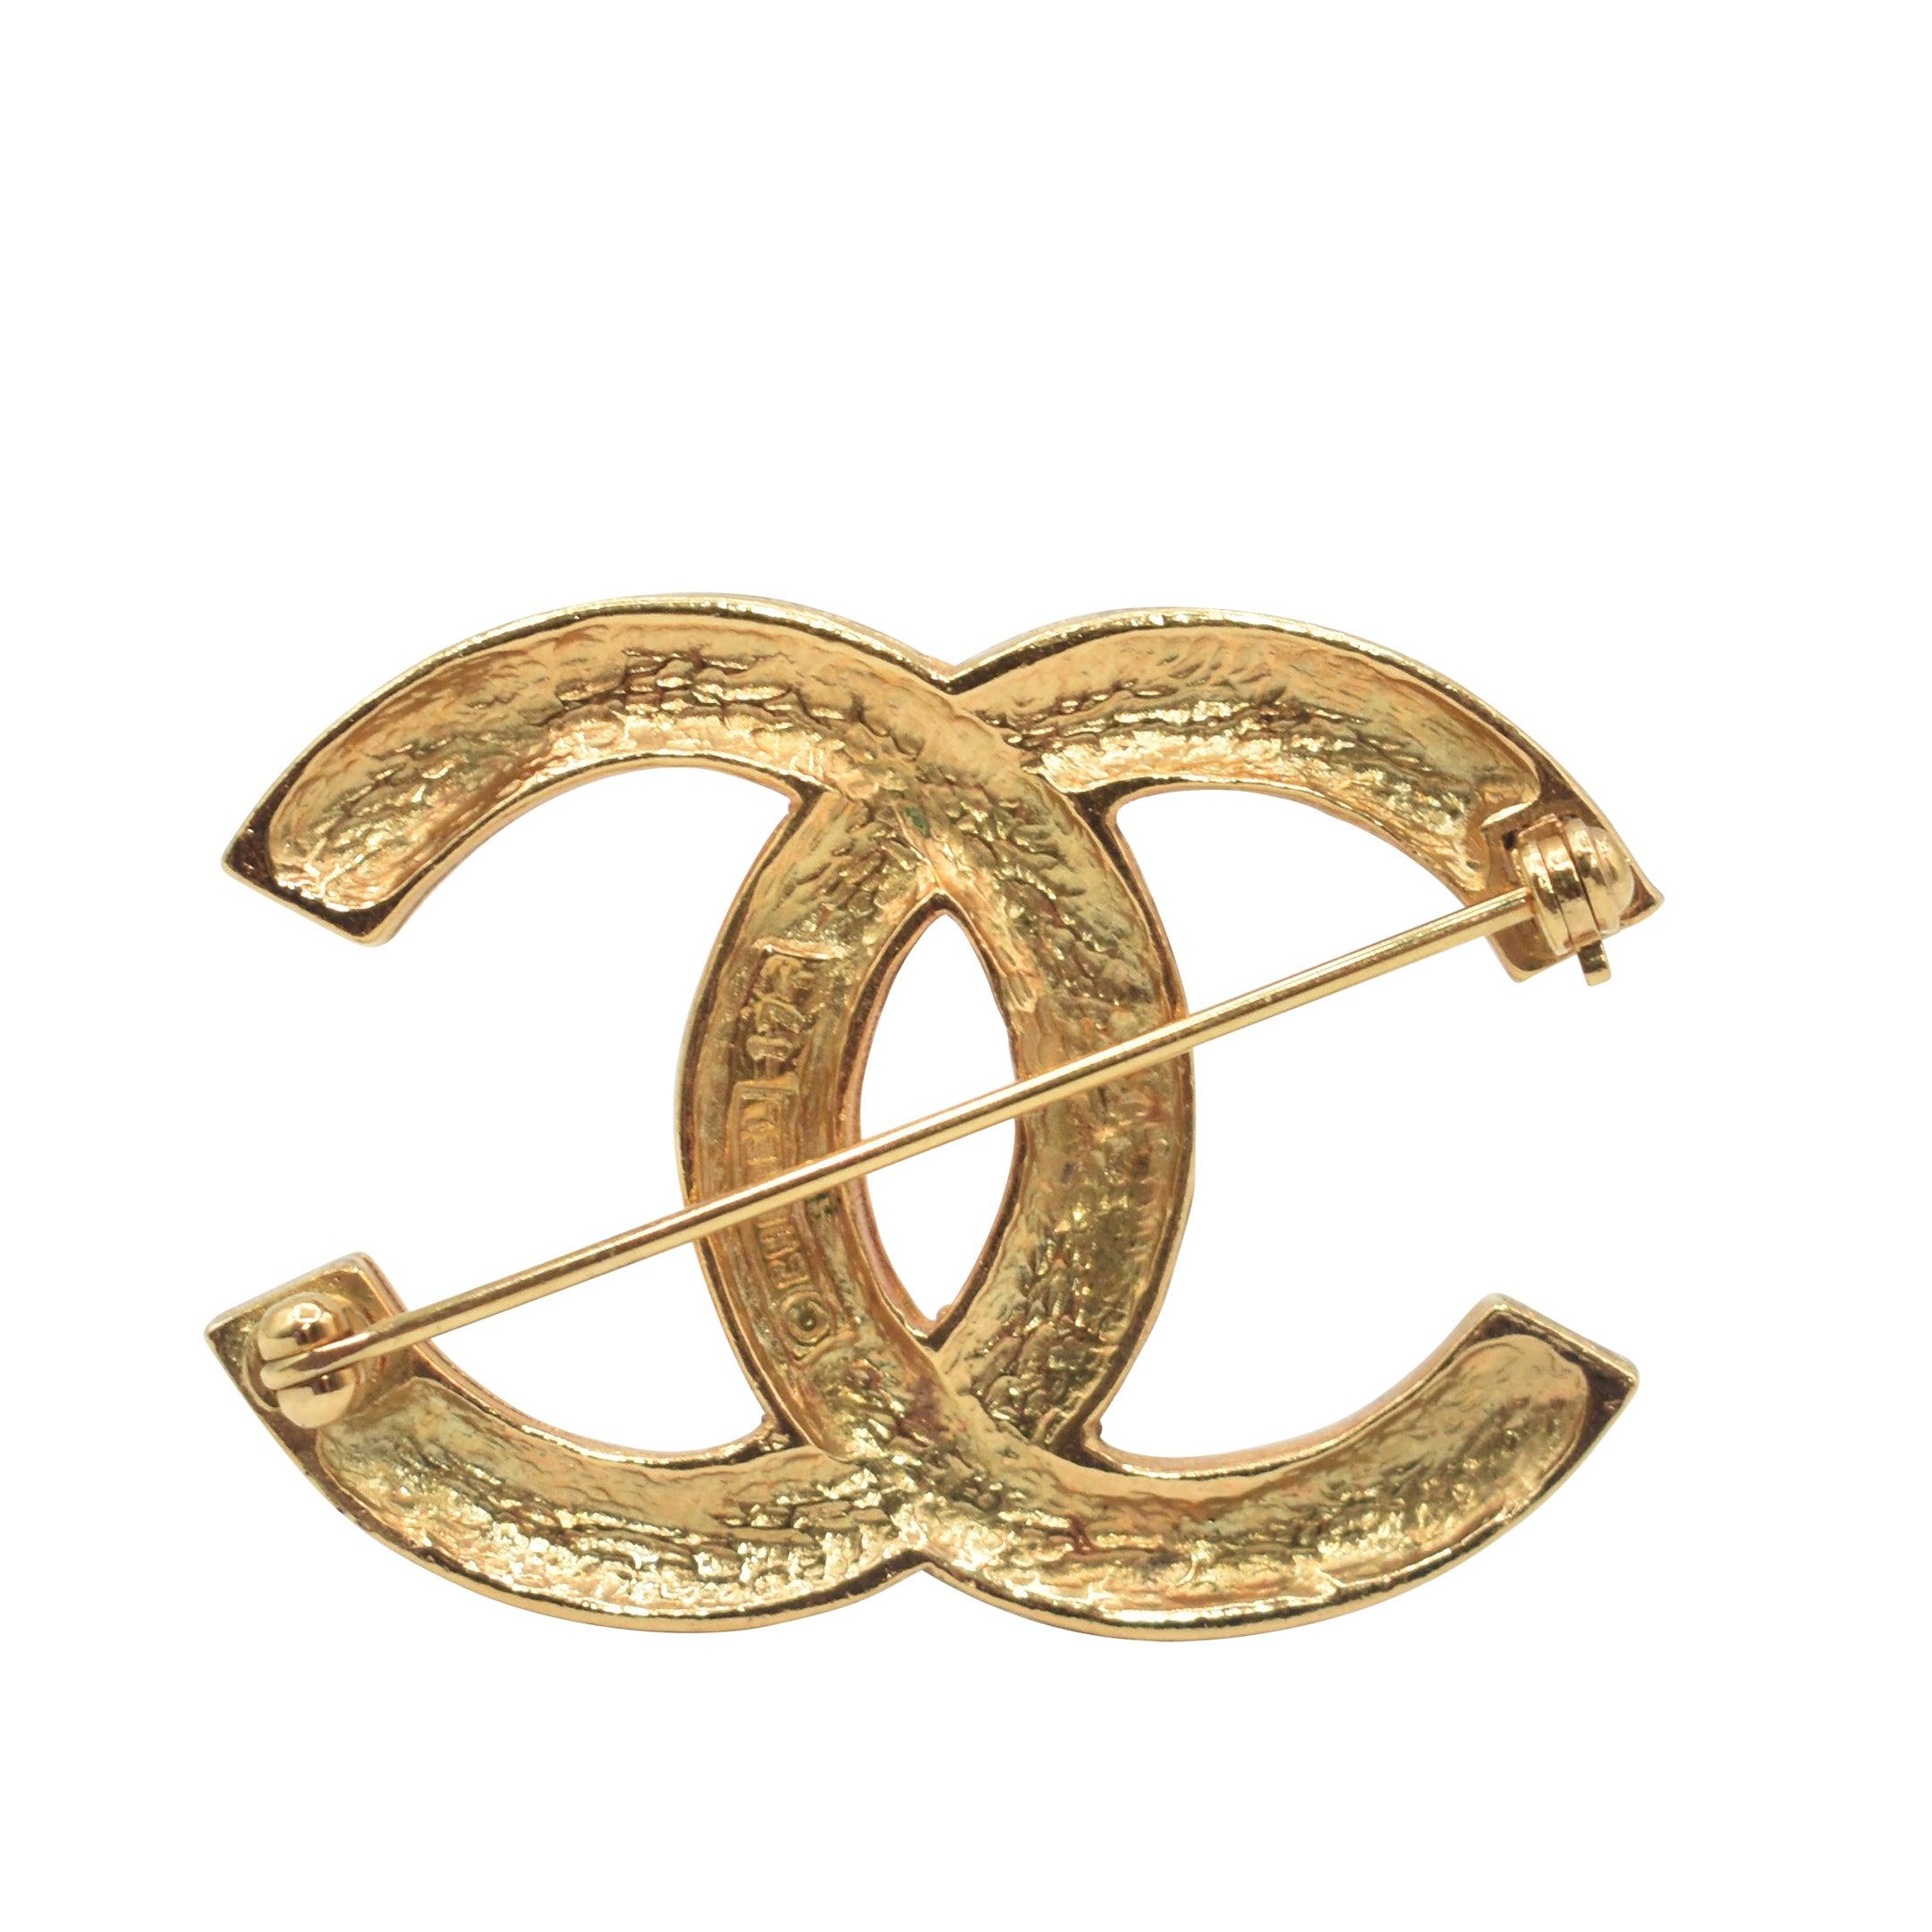 Chanel Brooch - Fashionably Yours